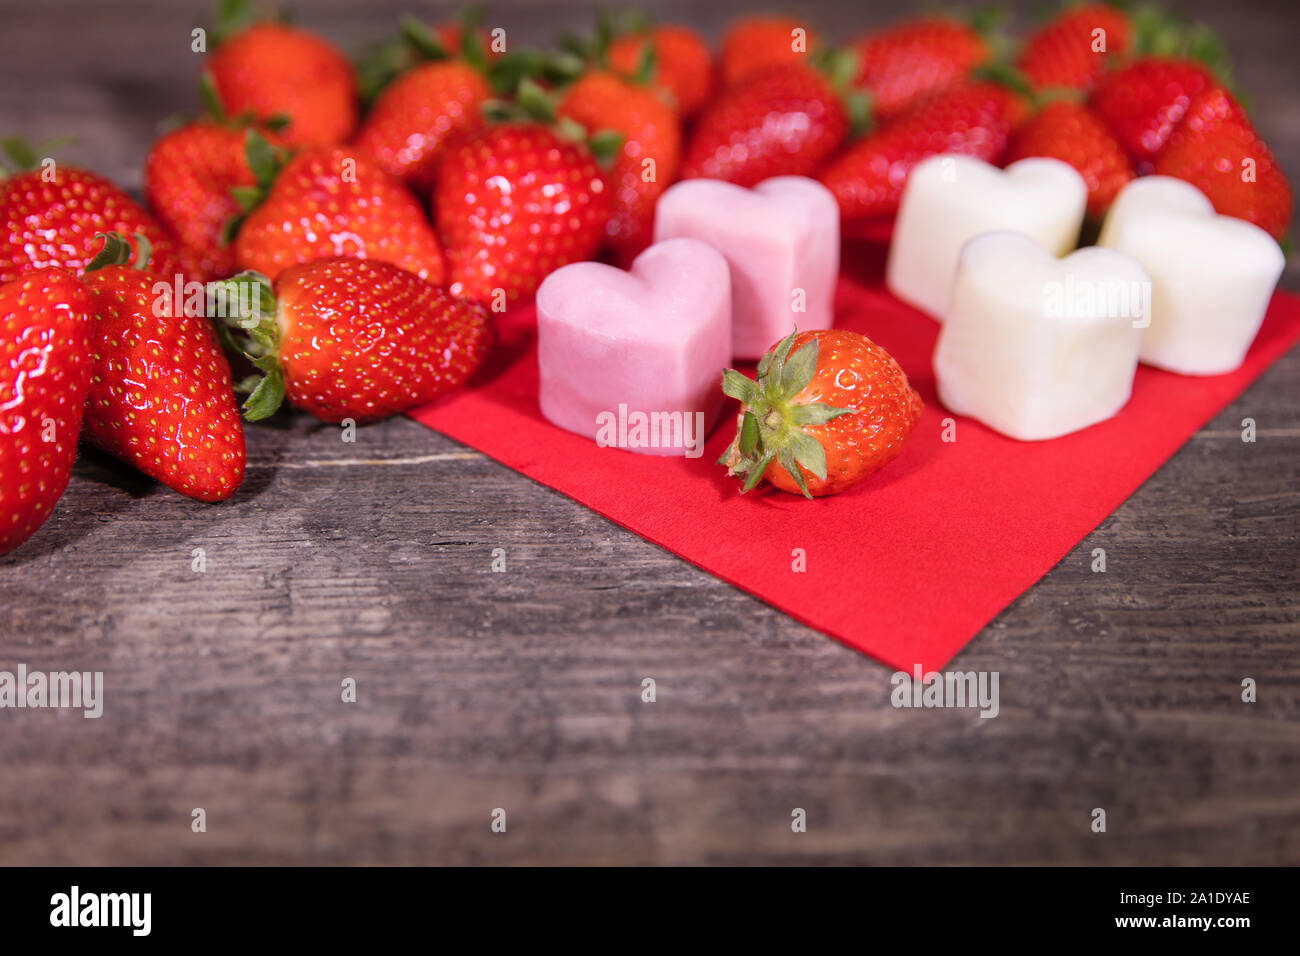 Frozen yogurt in a heart shape, Strawberries and froyo bites on wooden table Stock Photo